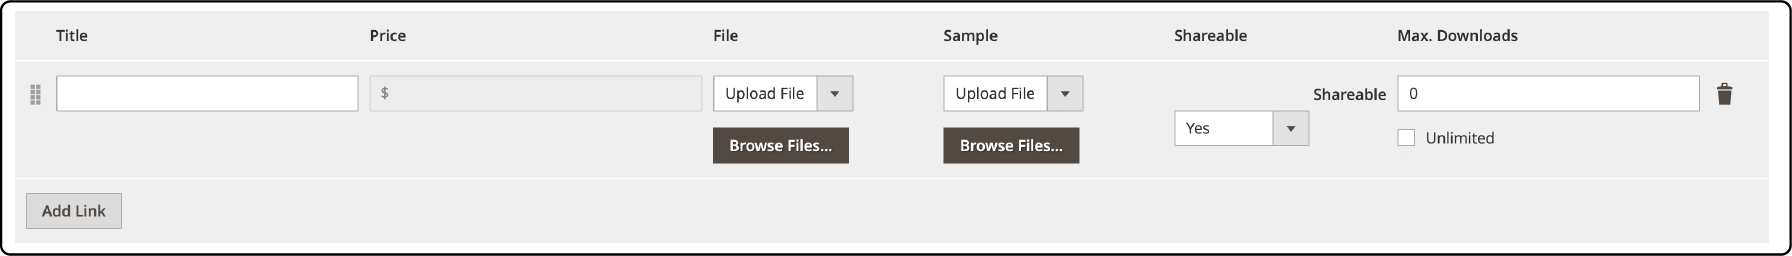 Magento interface showing how to input downloadable product details